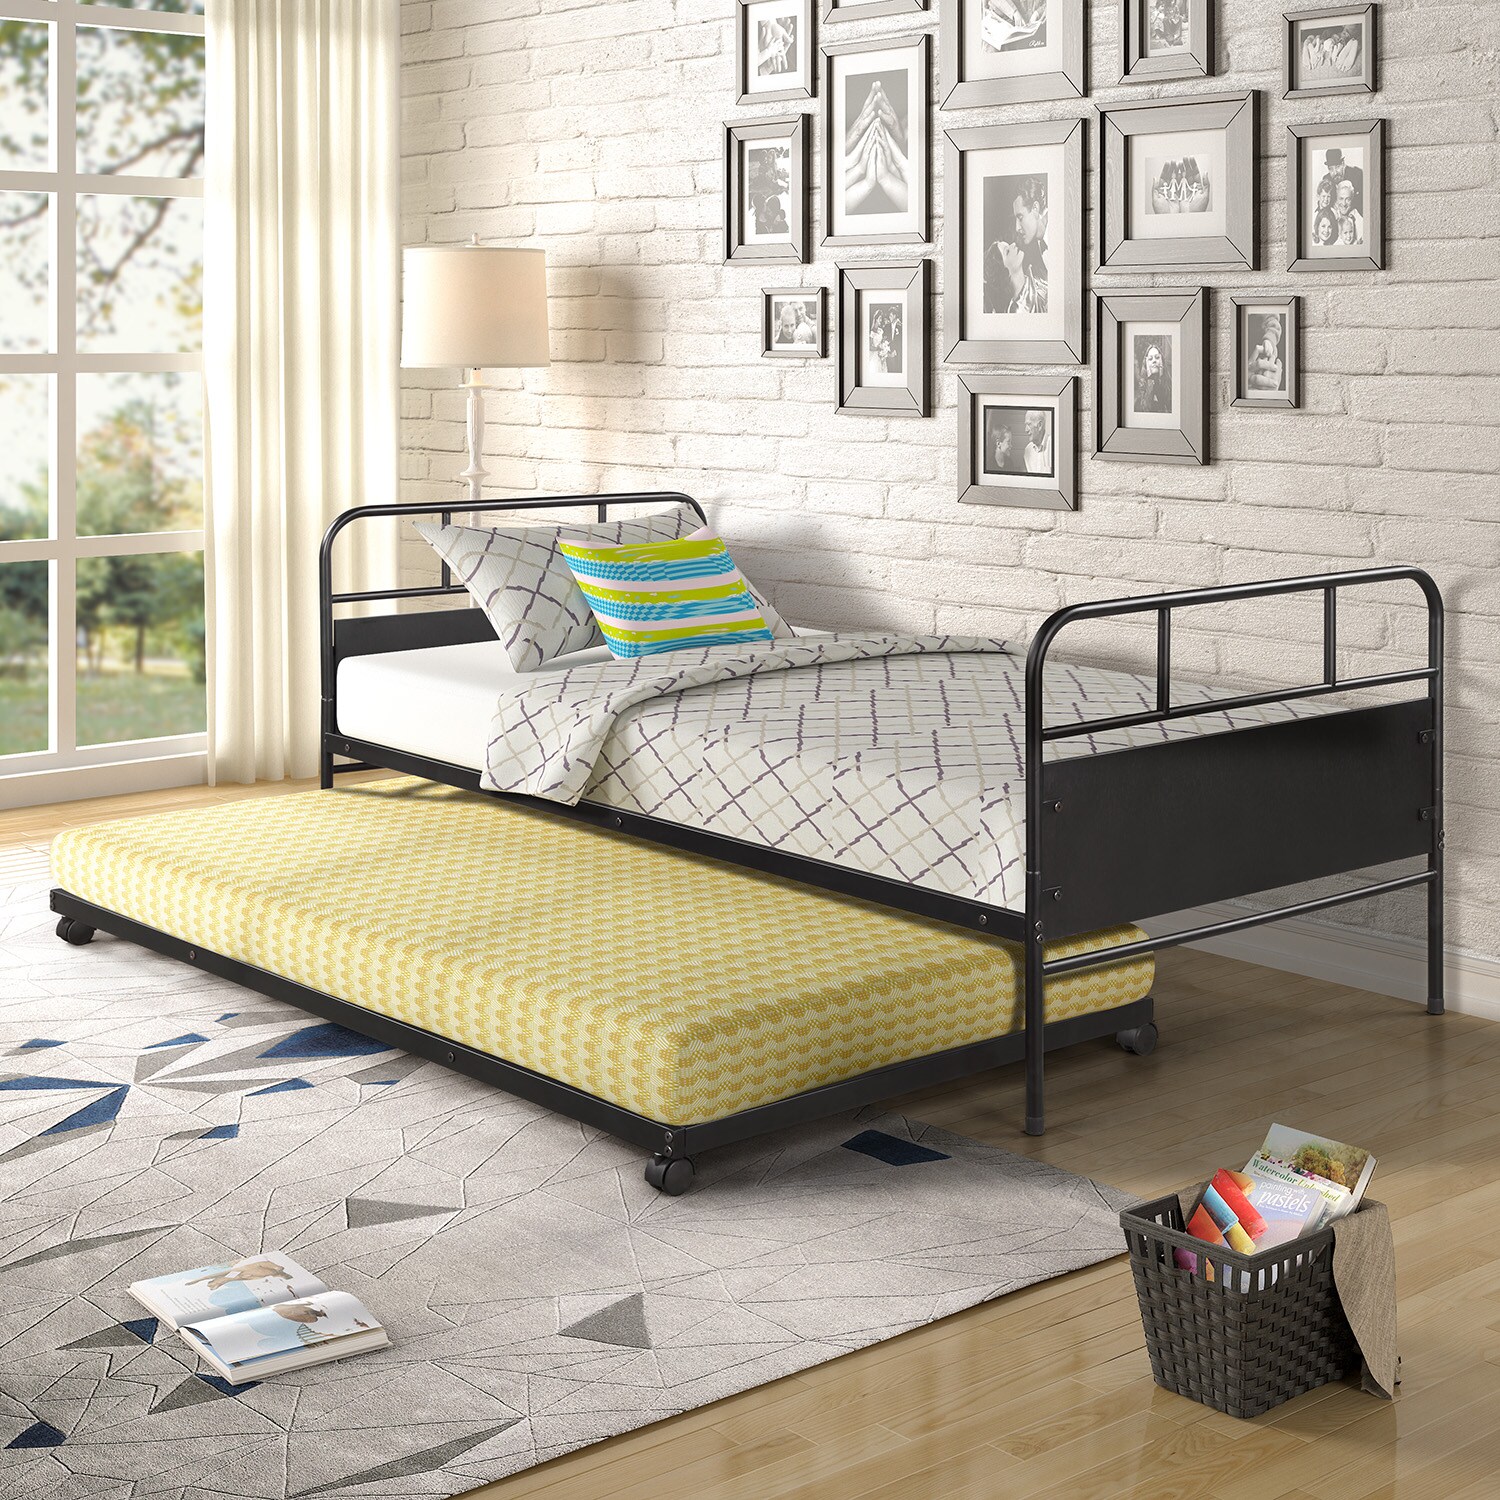 CASAINC Metal daybed platform bed Black Twin Metal Daybed in the Beds ...